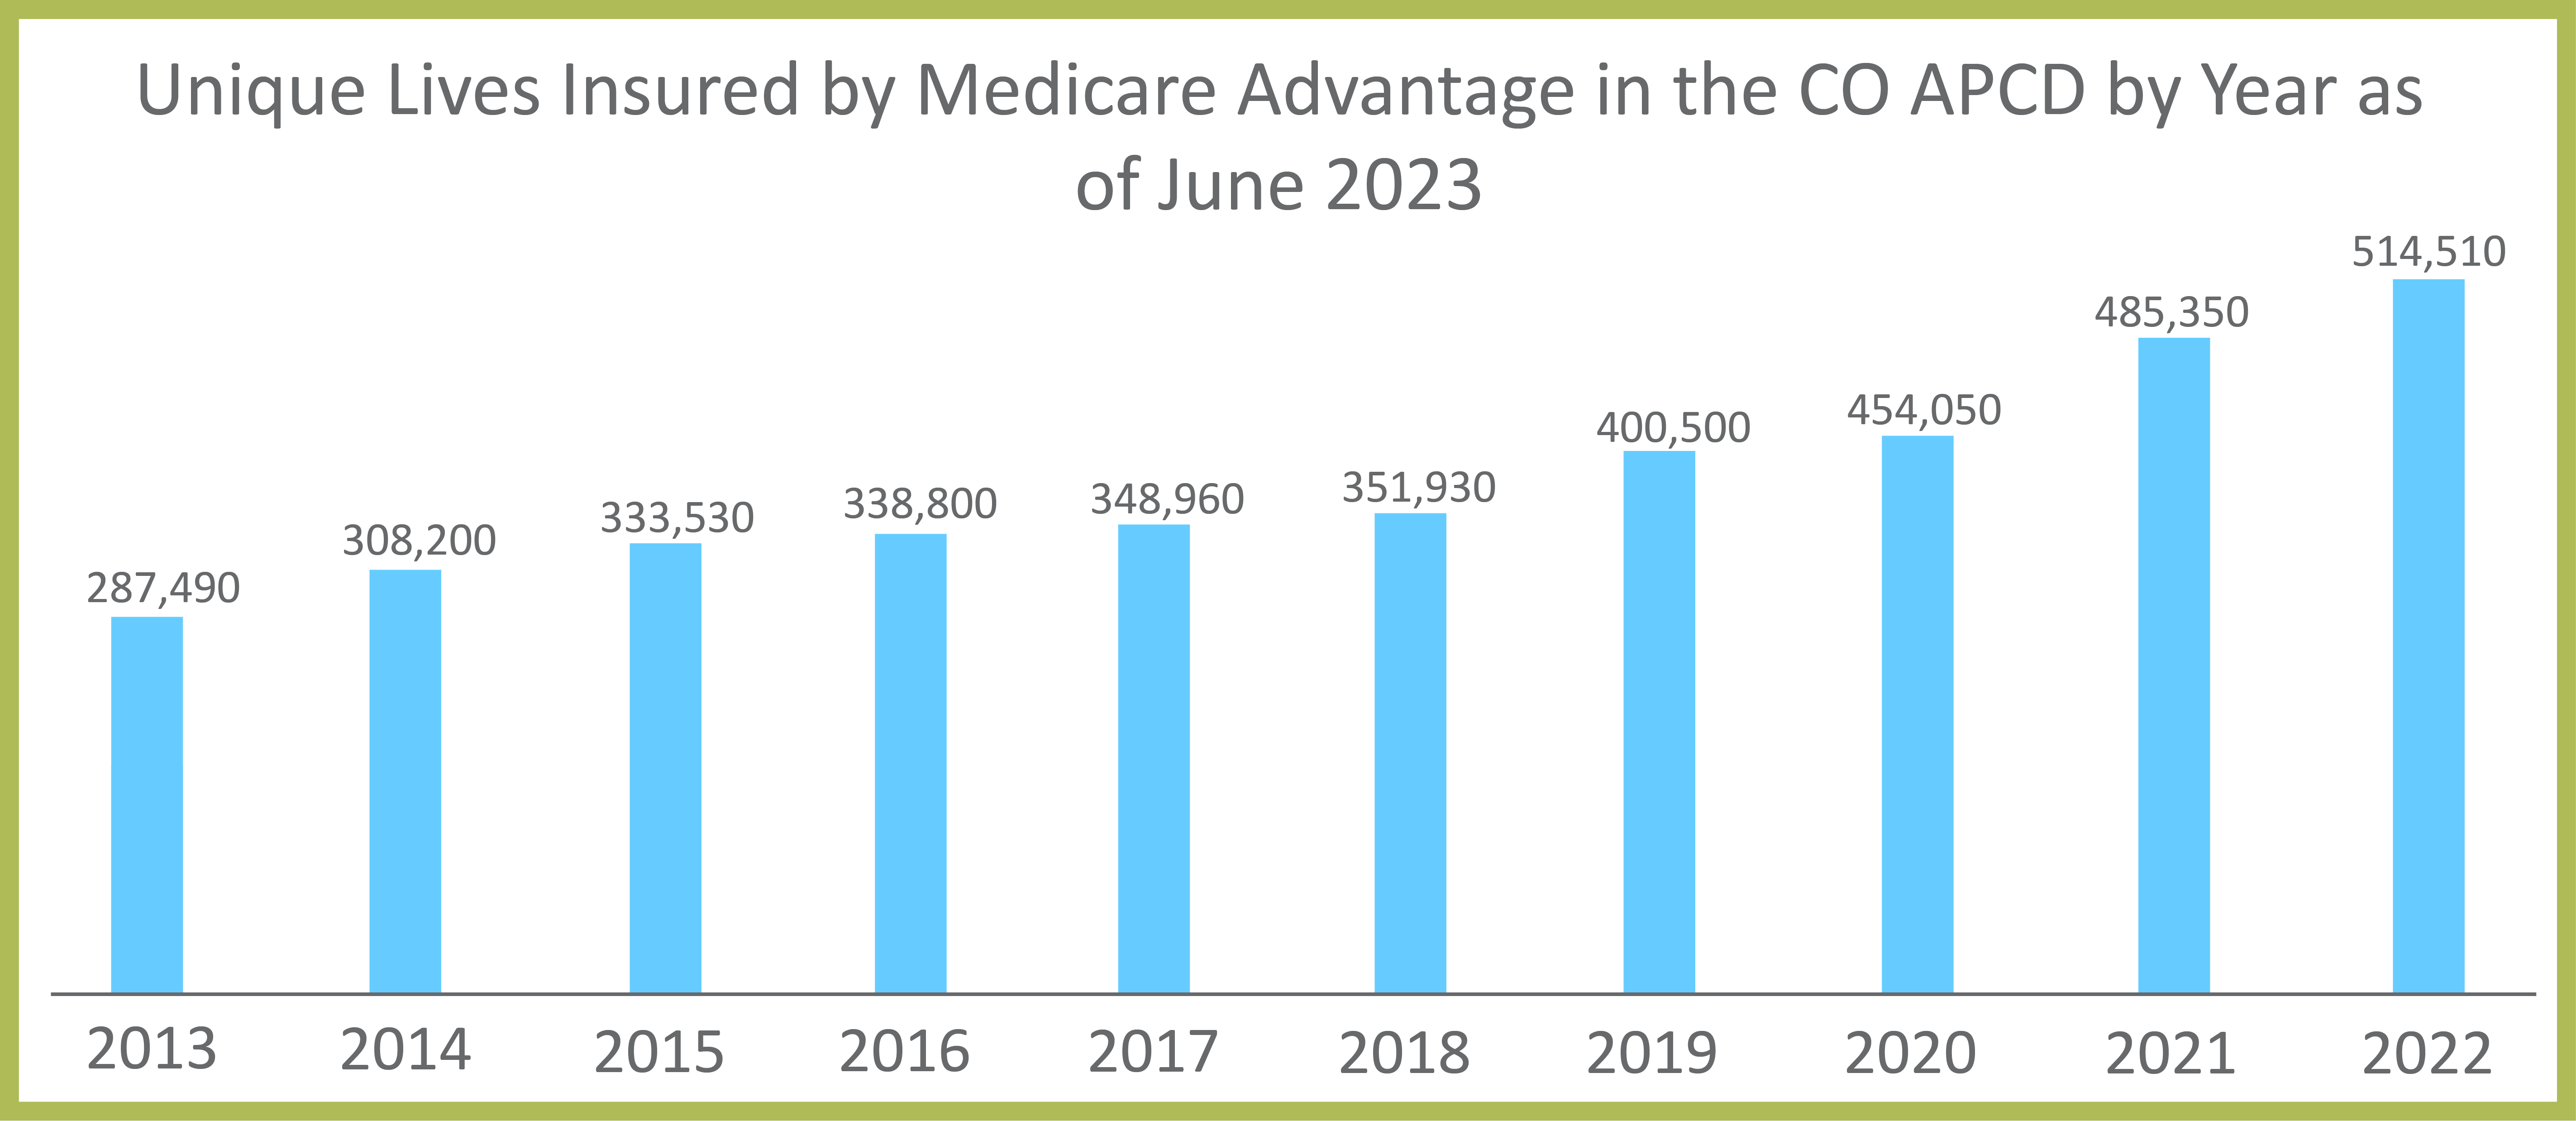 As of June 2023, there were 14,510 unique lives insured by Medicare Advantage in the CO APCD. 